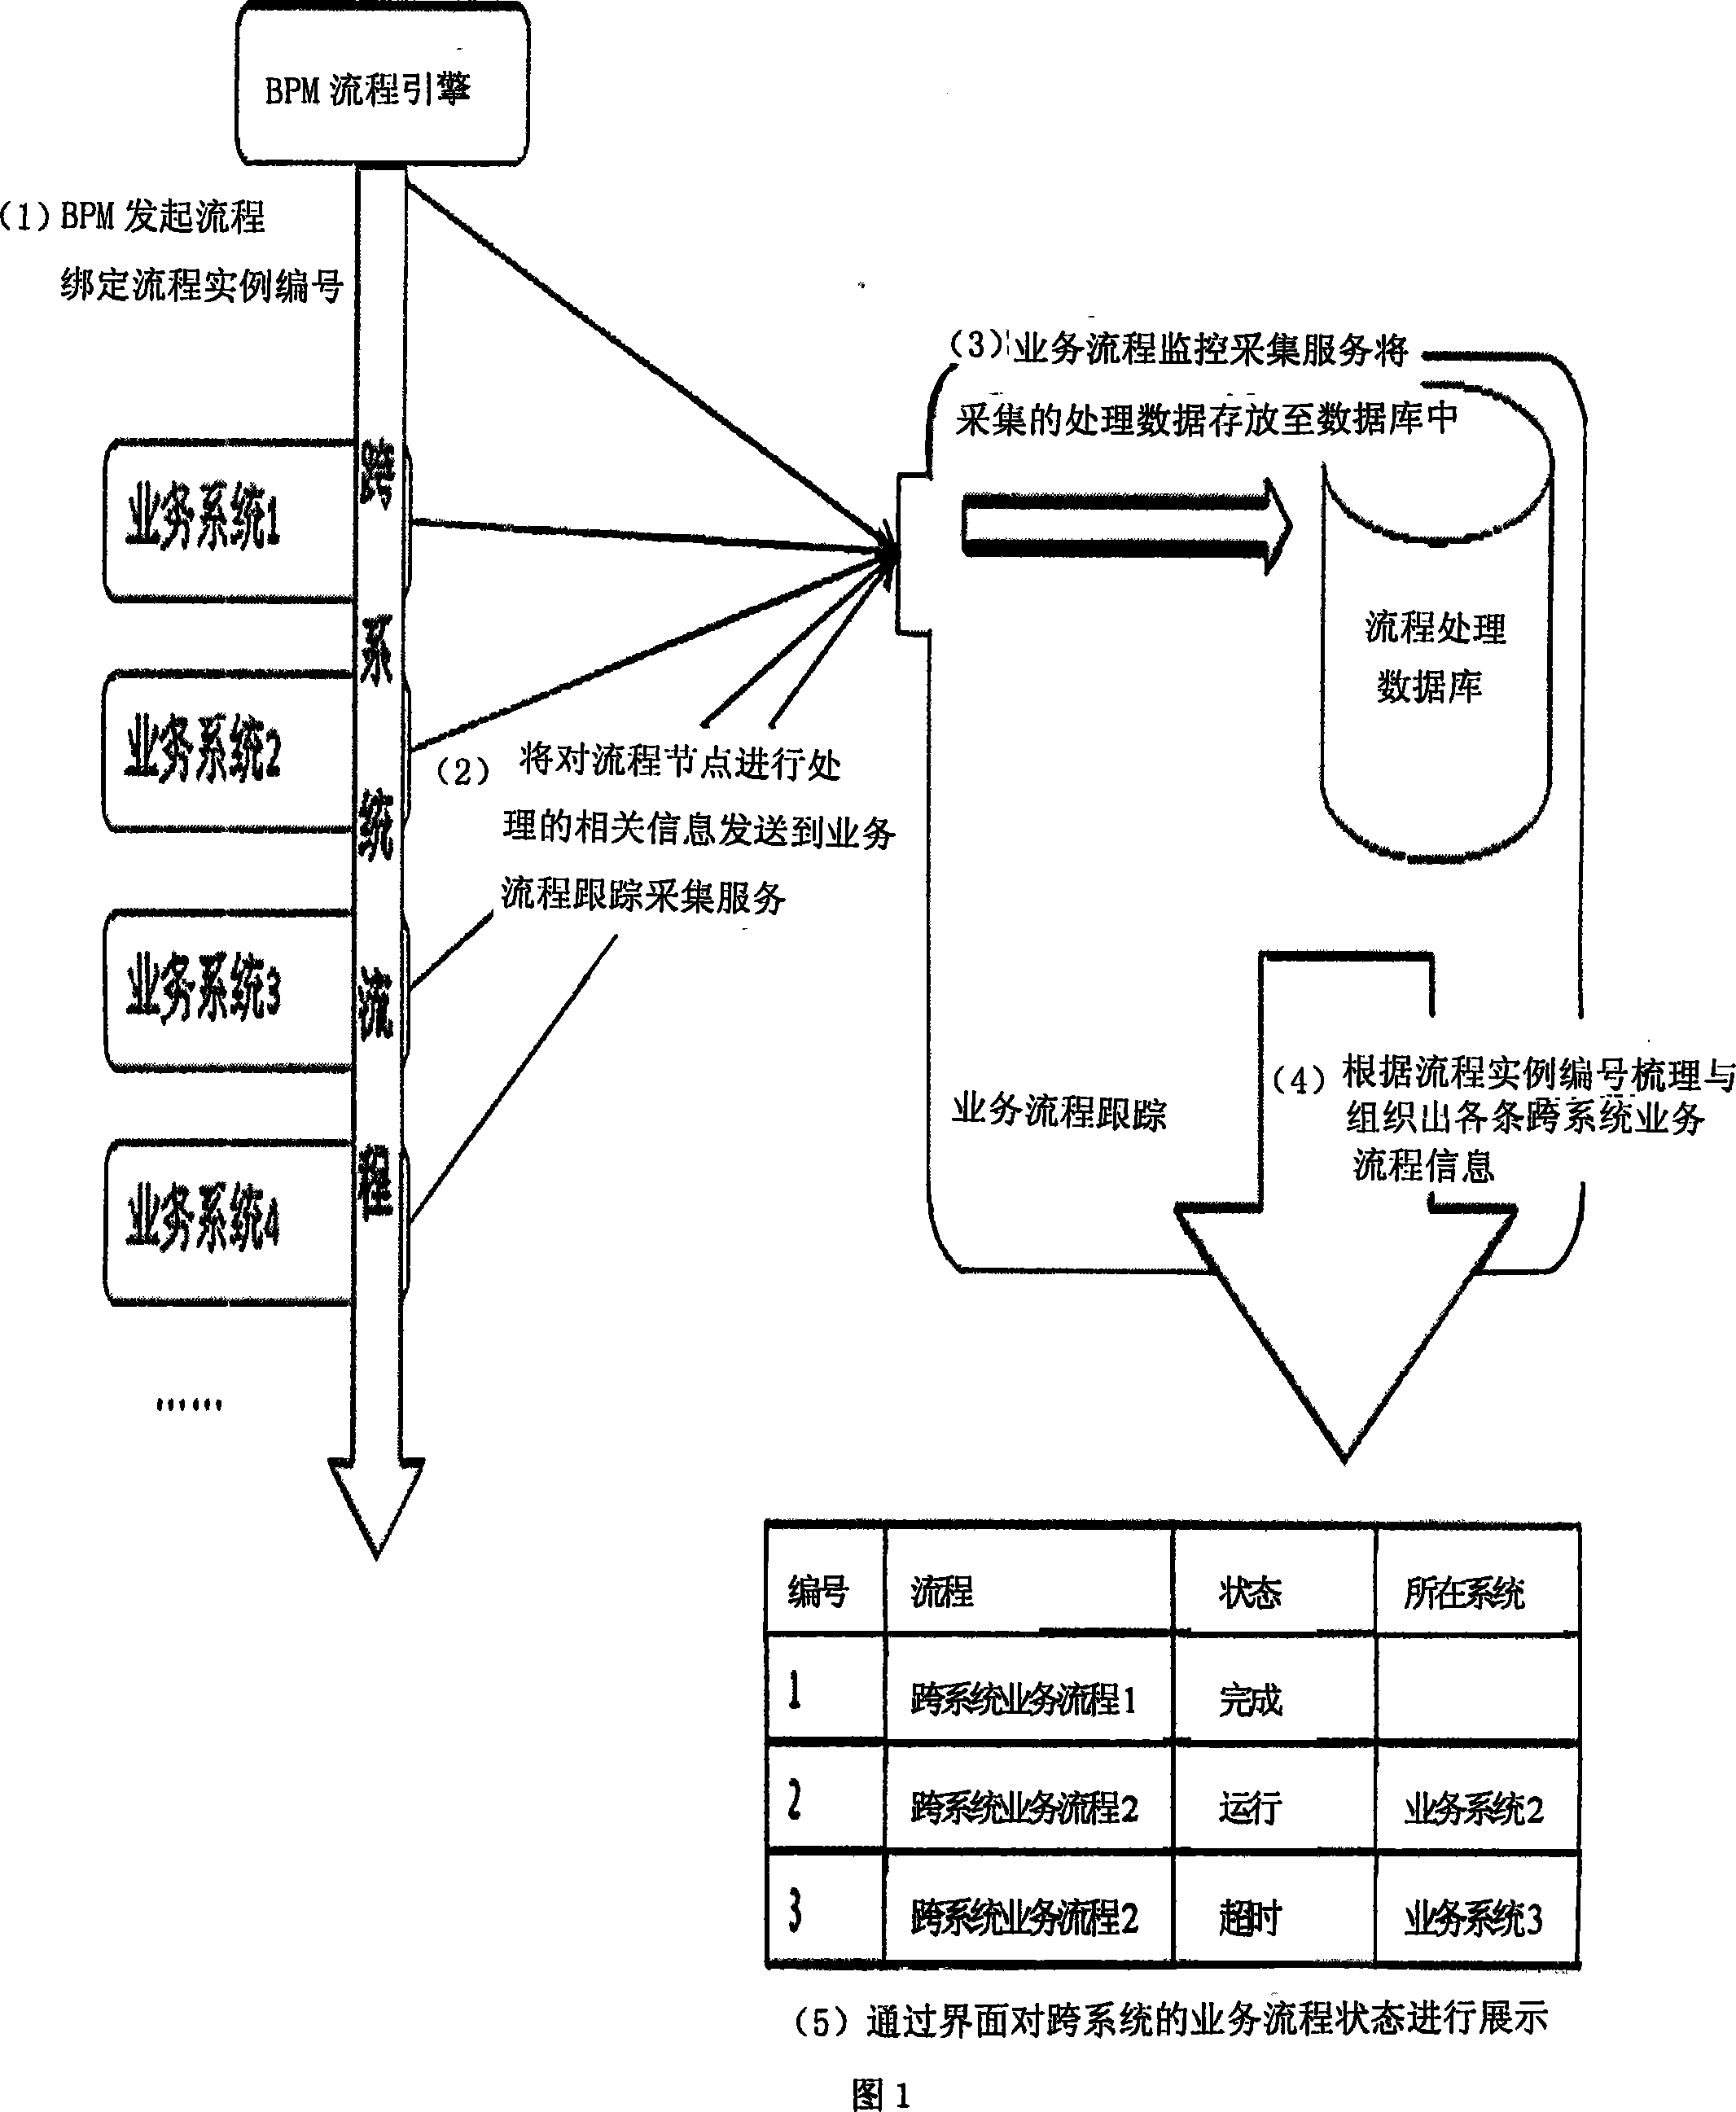 Method for monitoring process flow across business system